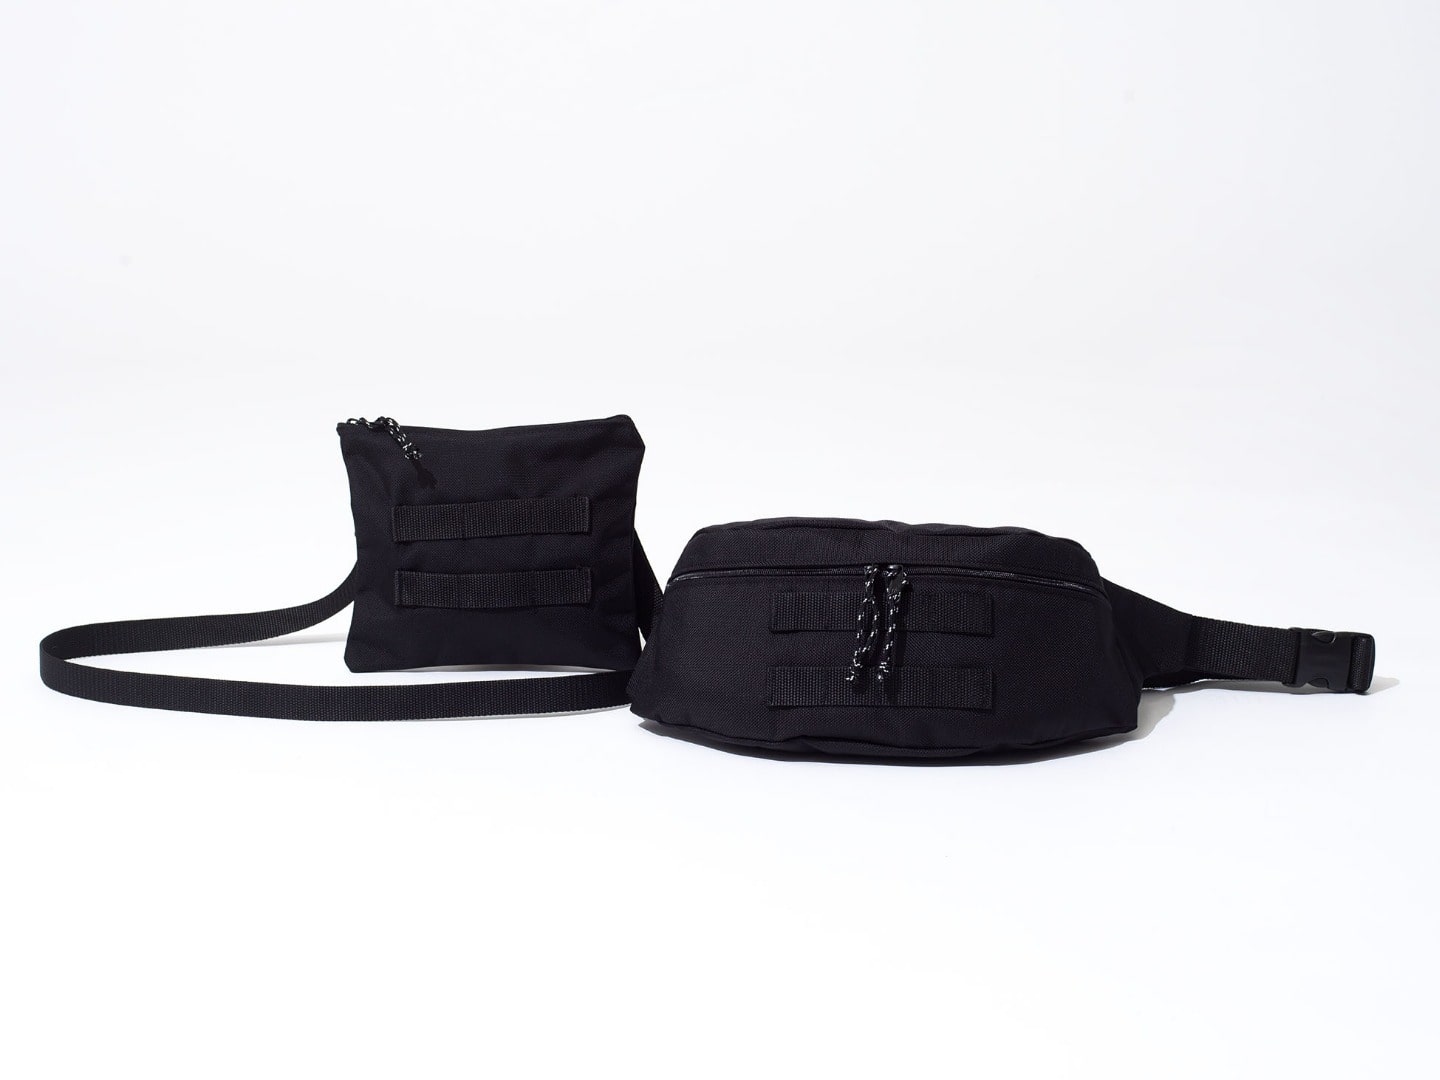 JIM MELVILLE for Ron Herman Bag Collection 8.11(Fri) New Arrival